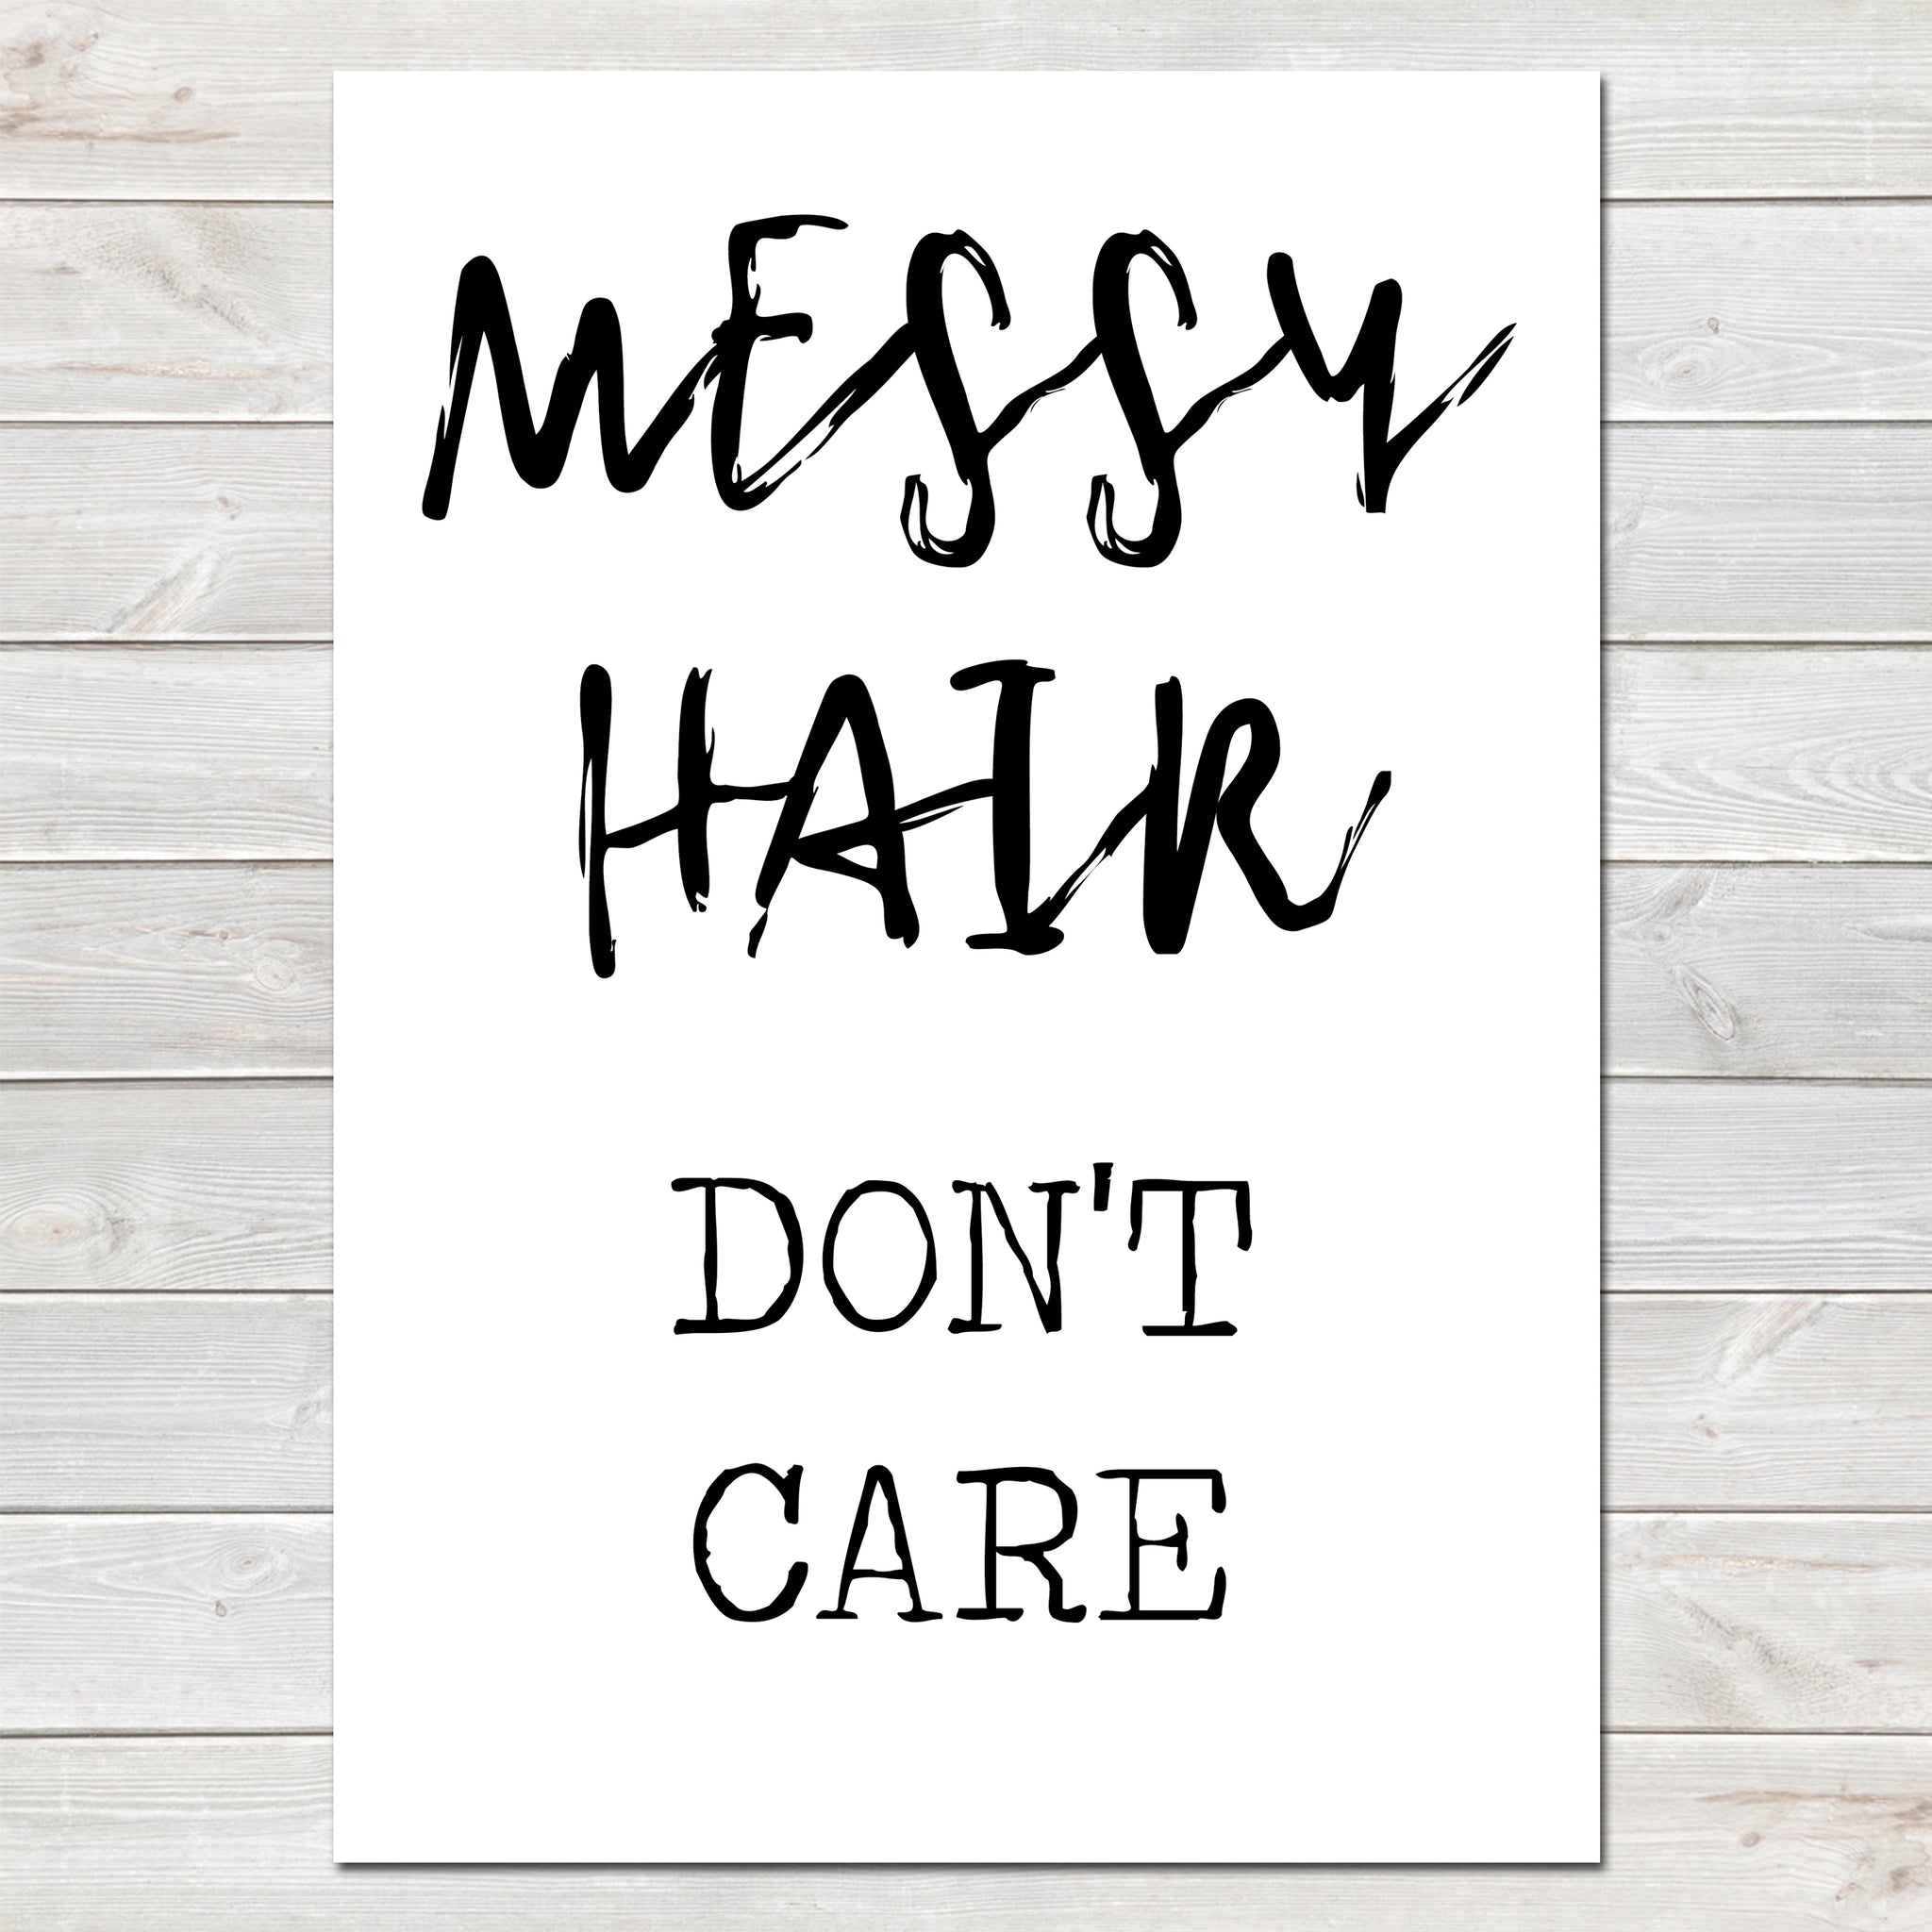 Messy Hair Don't Care, Fun Office Print, Home Decor